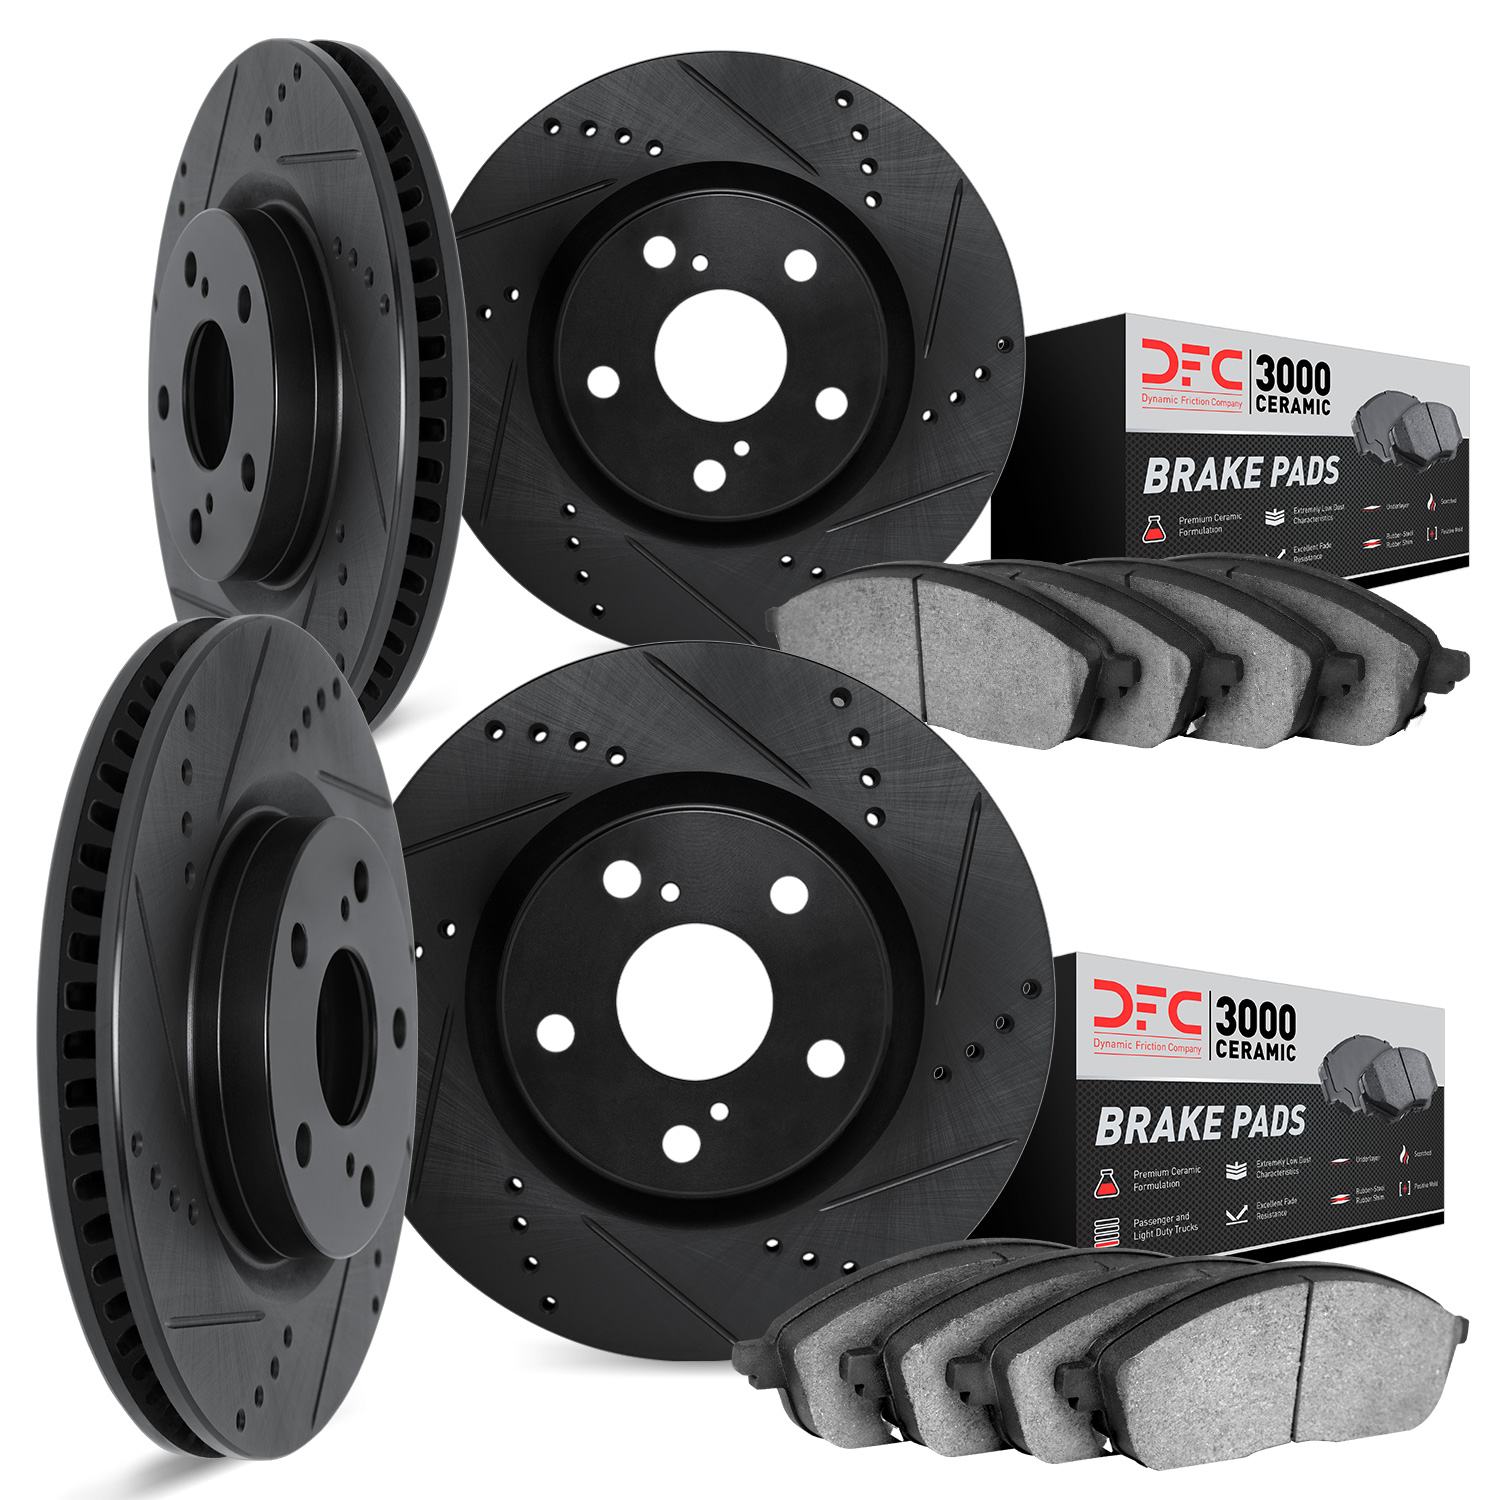 8304-20017 Drilled/Slotted Brake Rotors with 3000-Series Ceramic Brake Pads Kit [Black], Fits Select Jaguar, Position: Front and